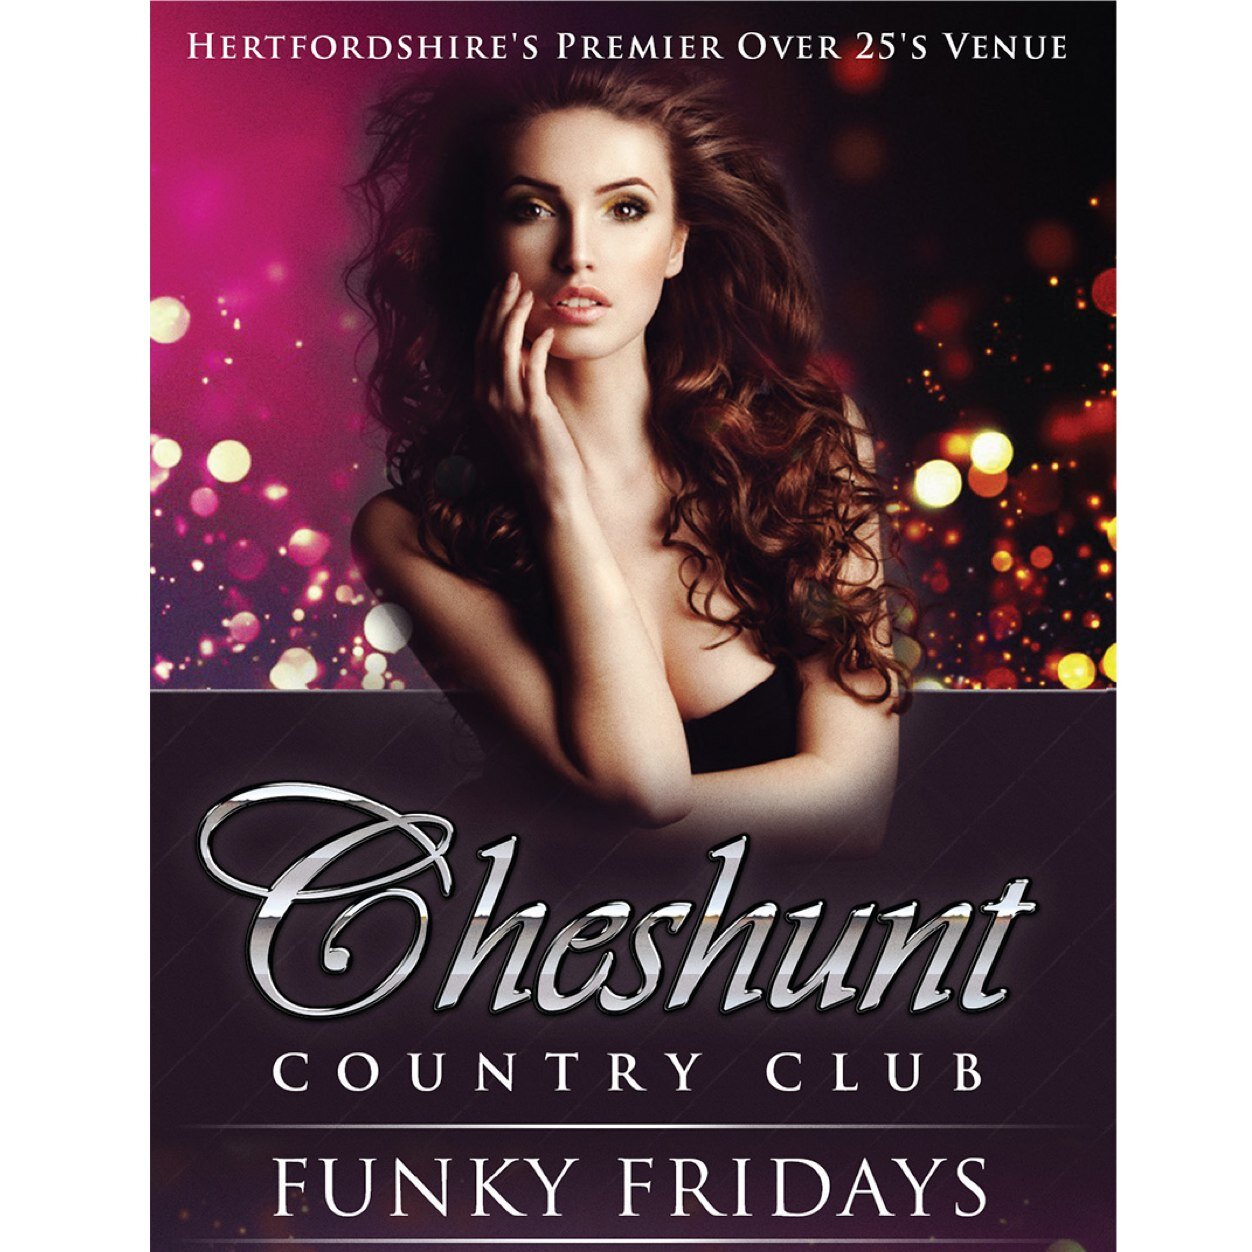 The Cheshunt Country Club - Hertfordshires Only Over 25's Venue For The Older Party Crowd! Open every Friday + selected Saturdays